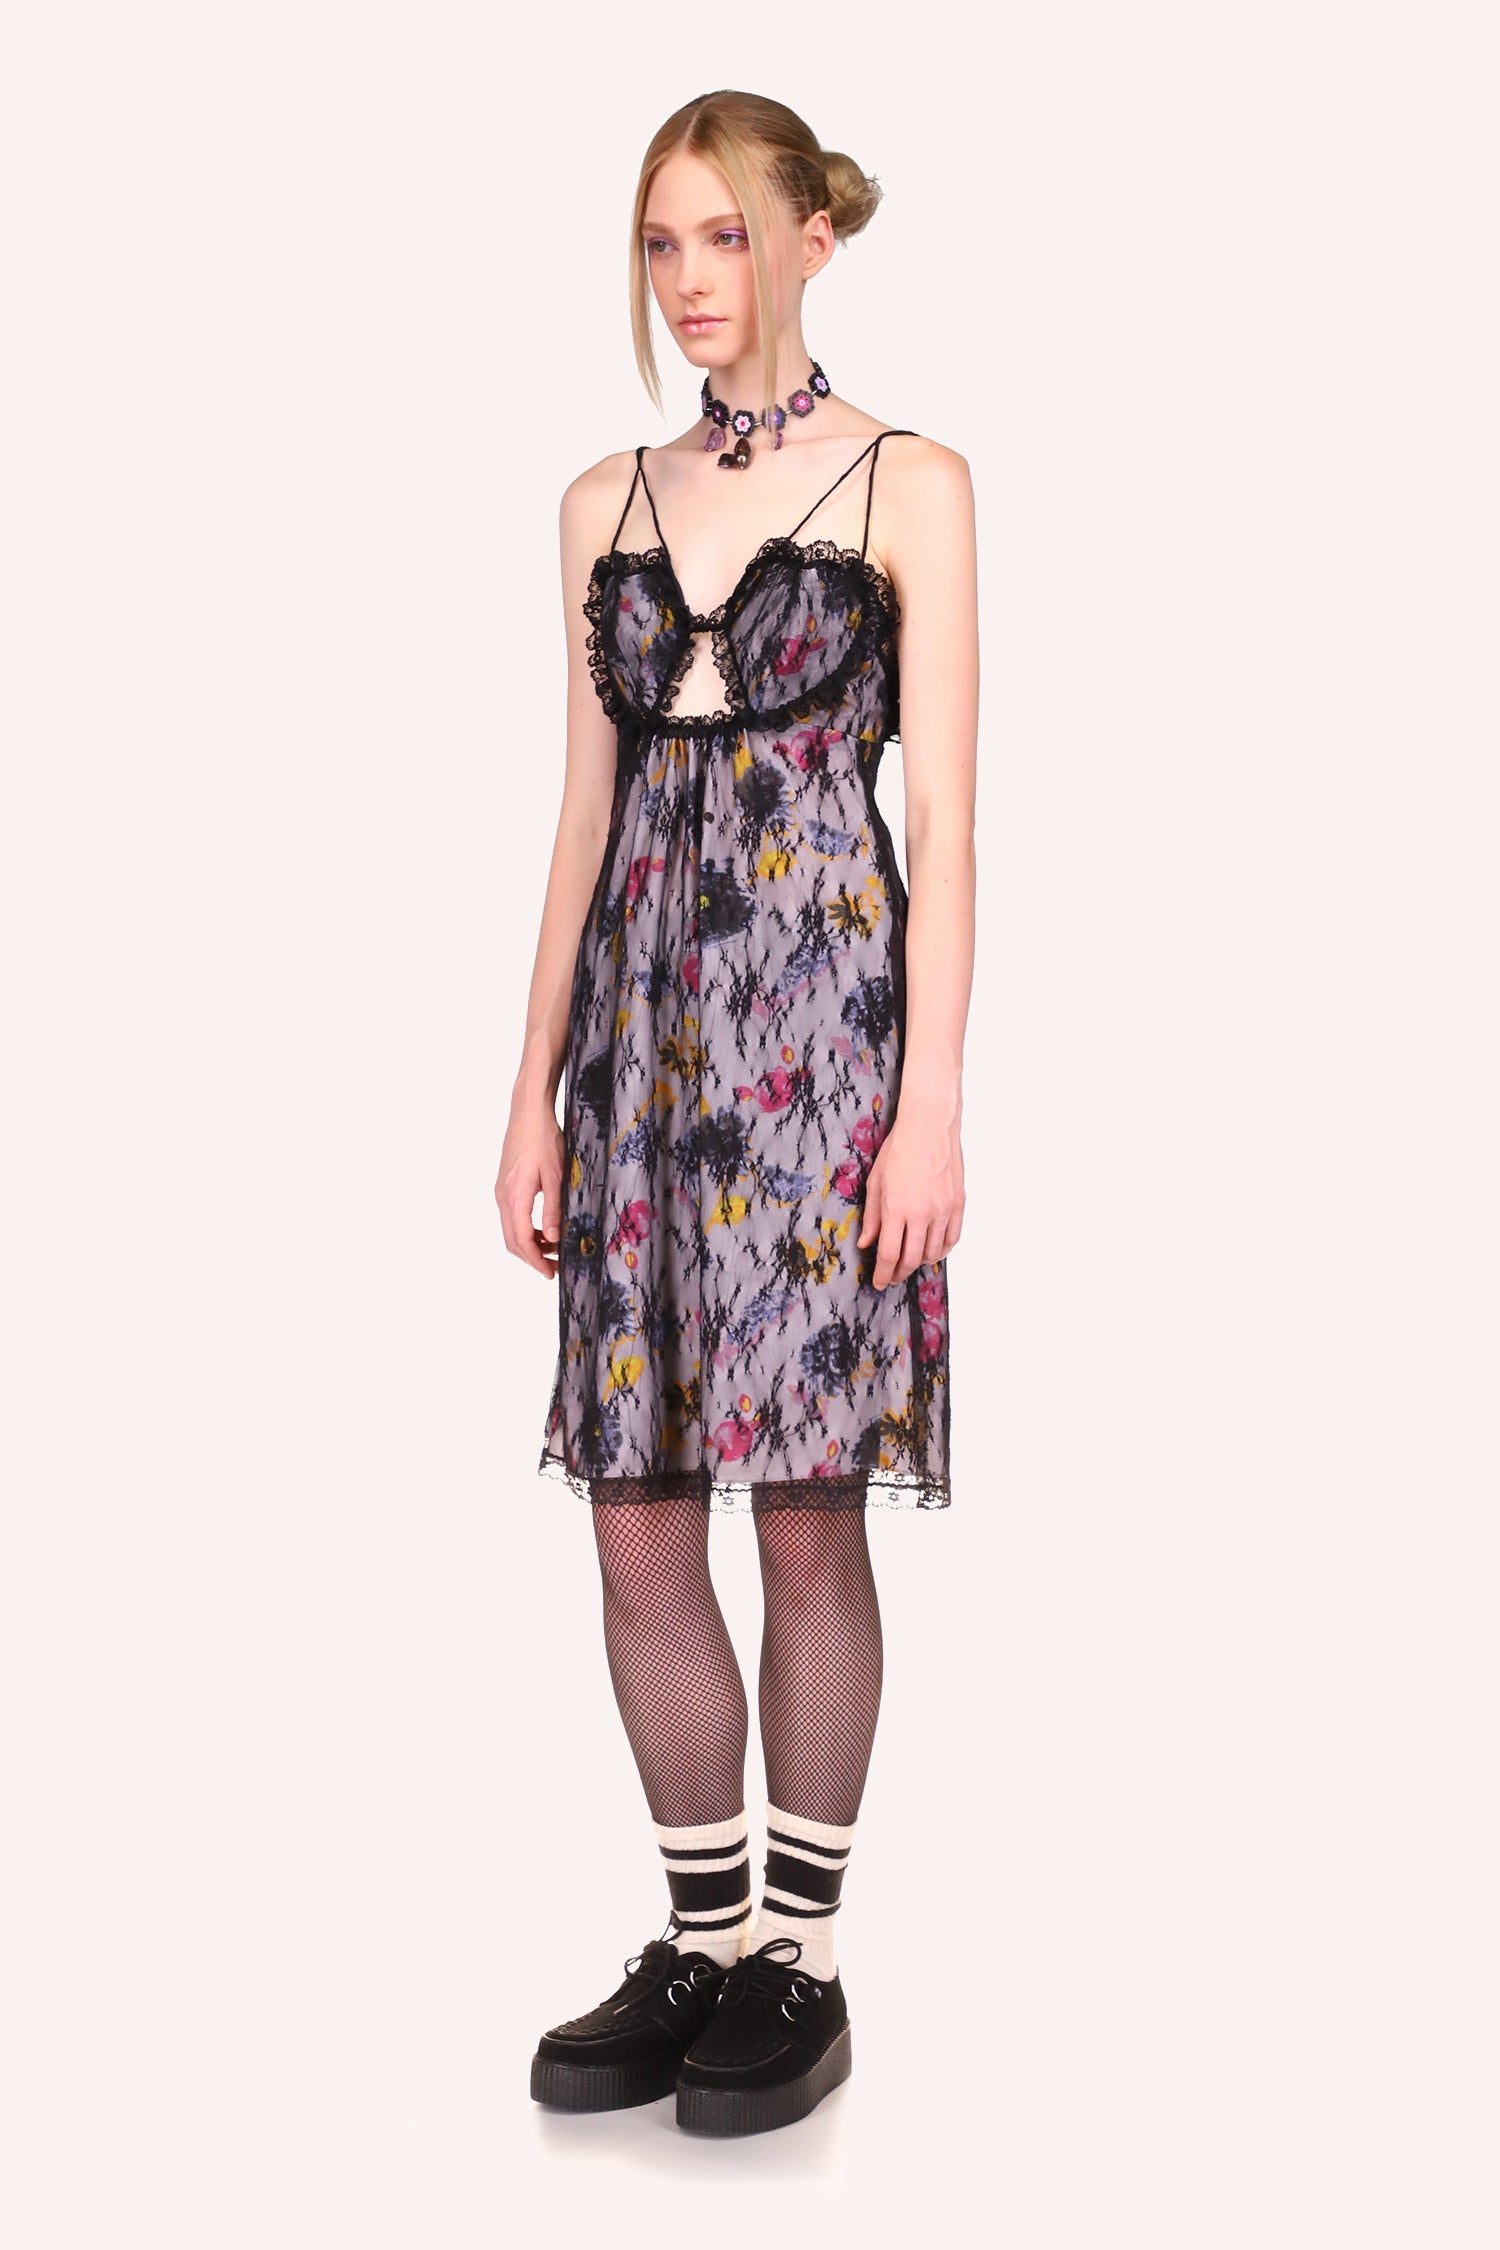 Sketch Flower and Lace Heart Dress, sleeveless, pattern of flowers, black lace on all hems